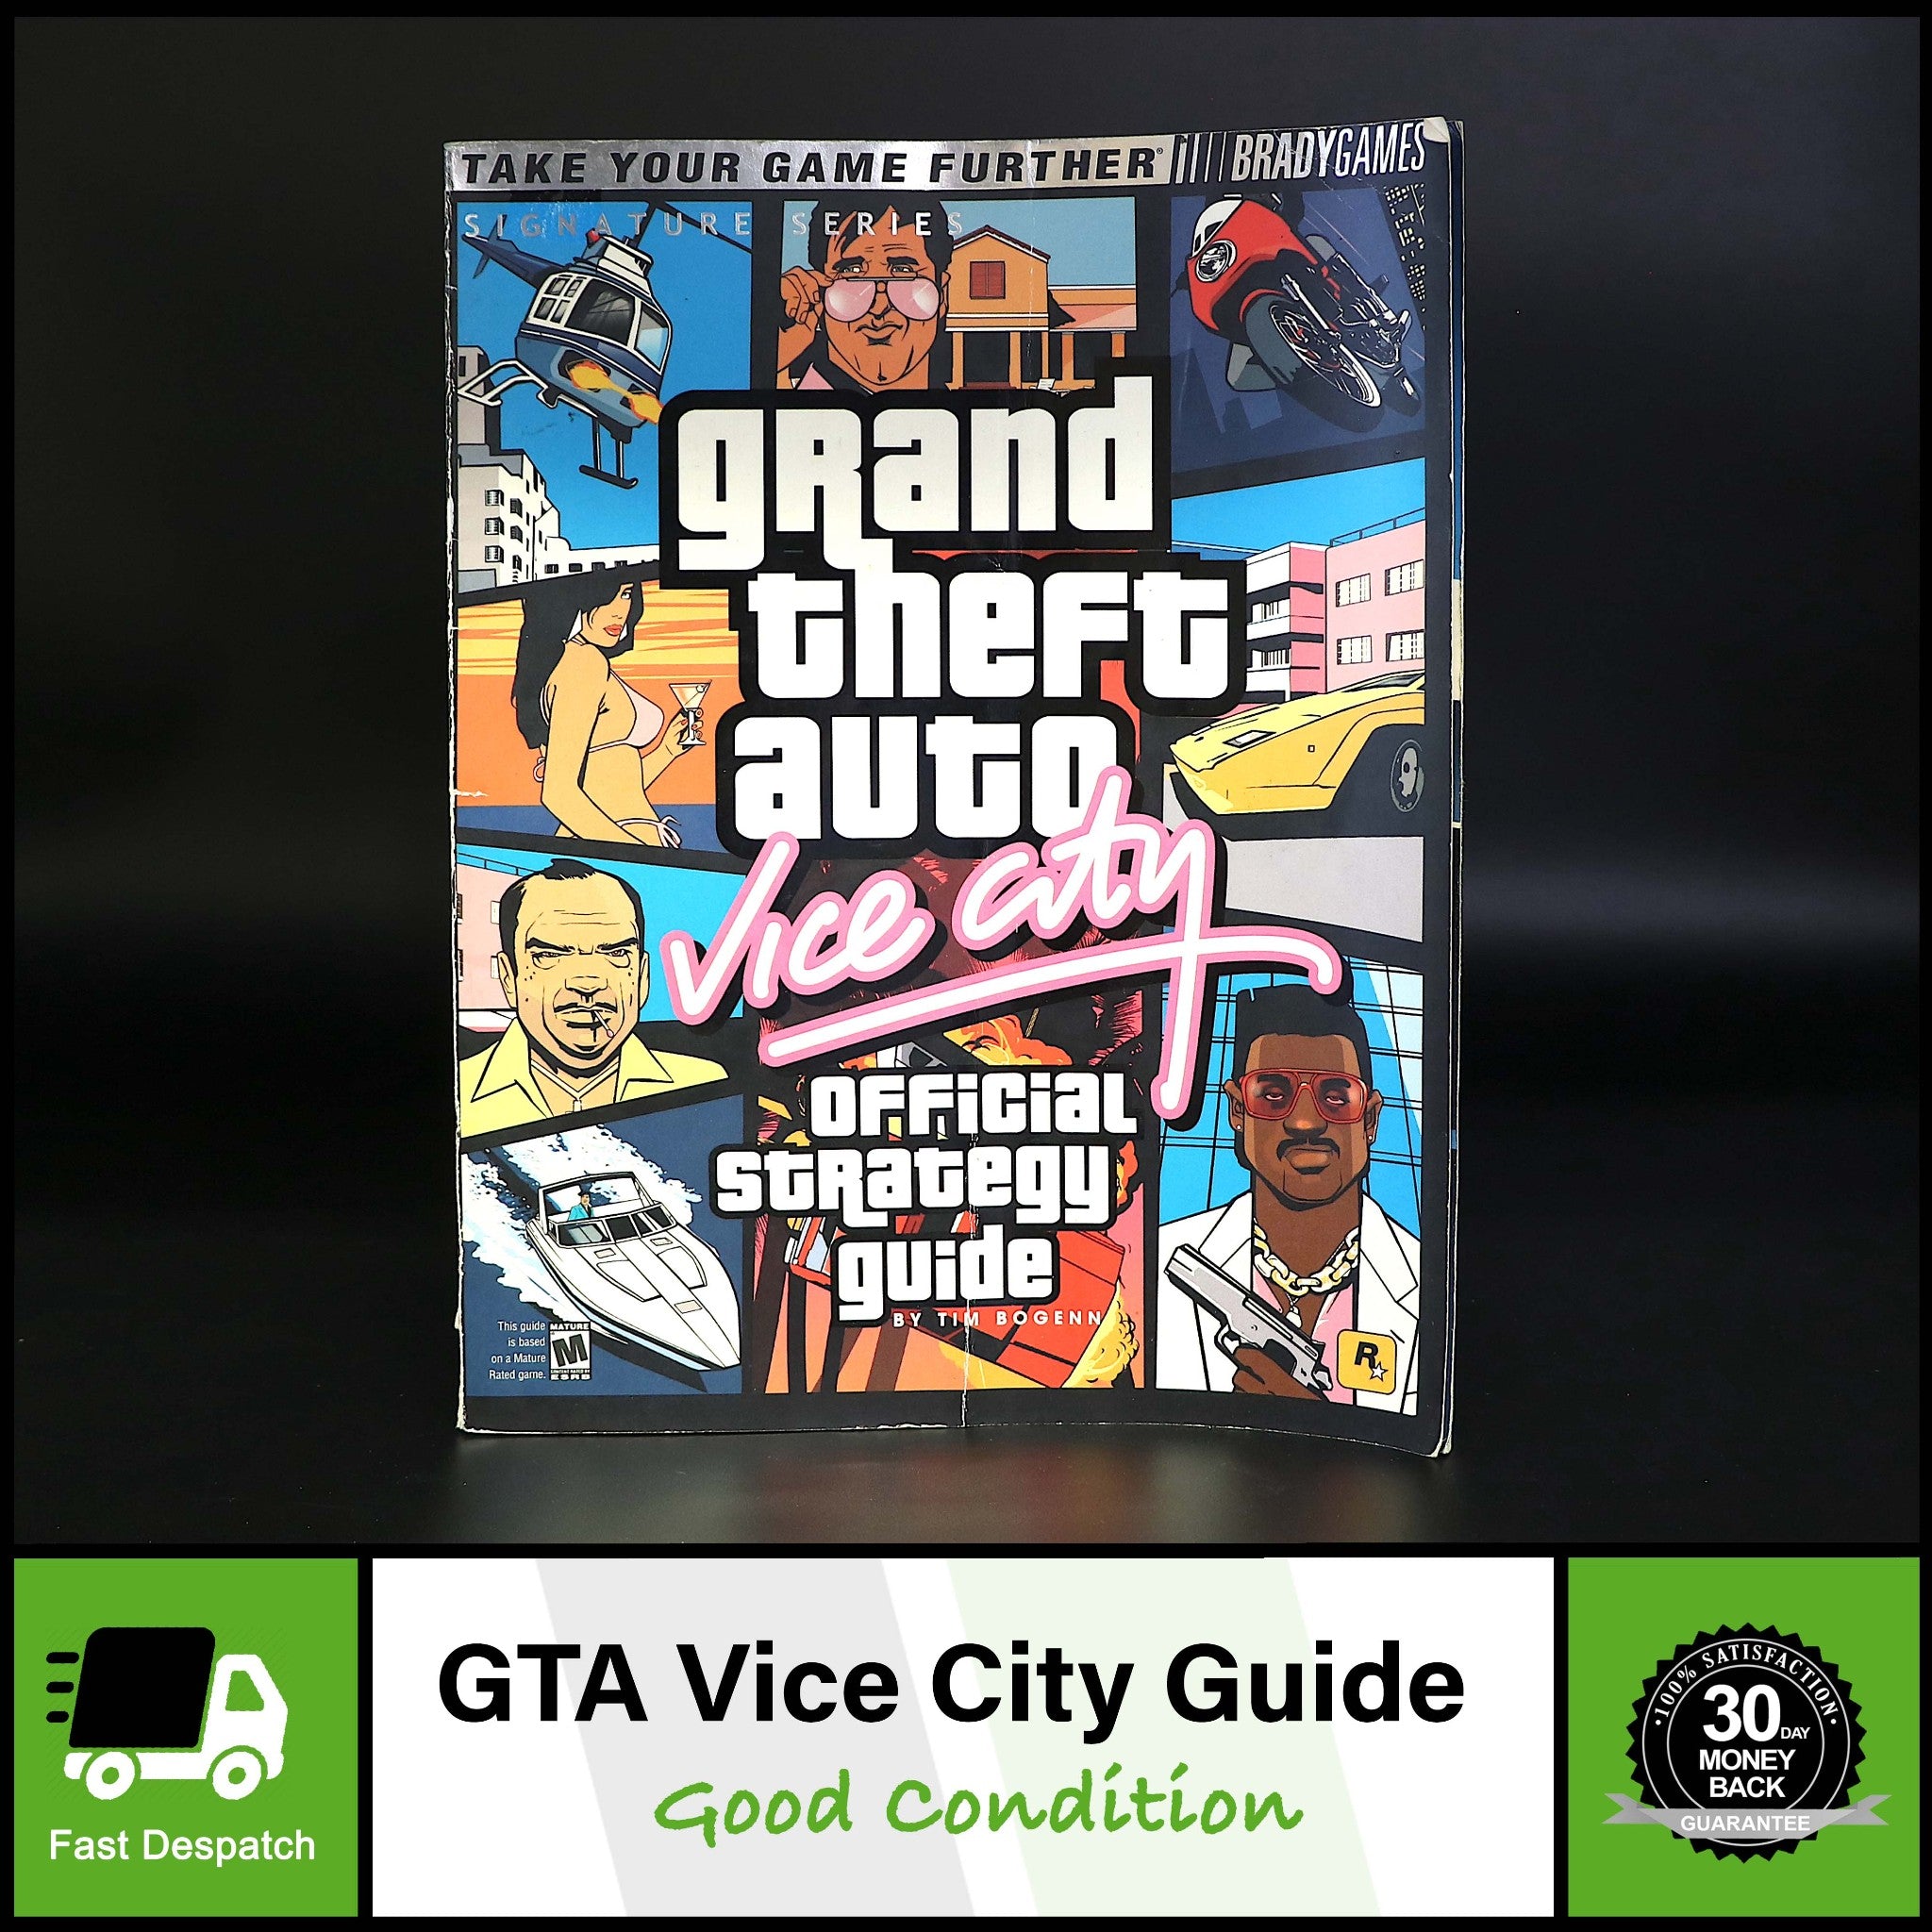 Grand Theft Auto: Vice City Stories (PS2) by BradyGames